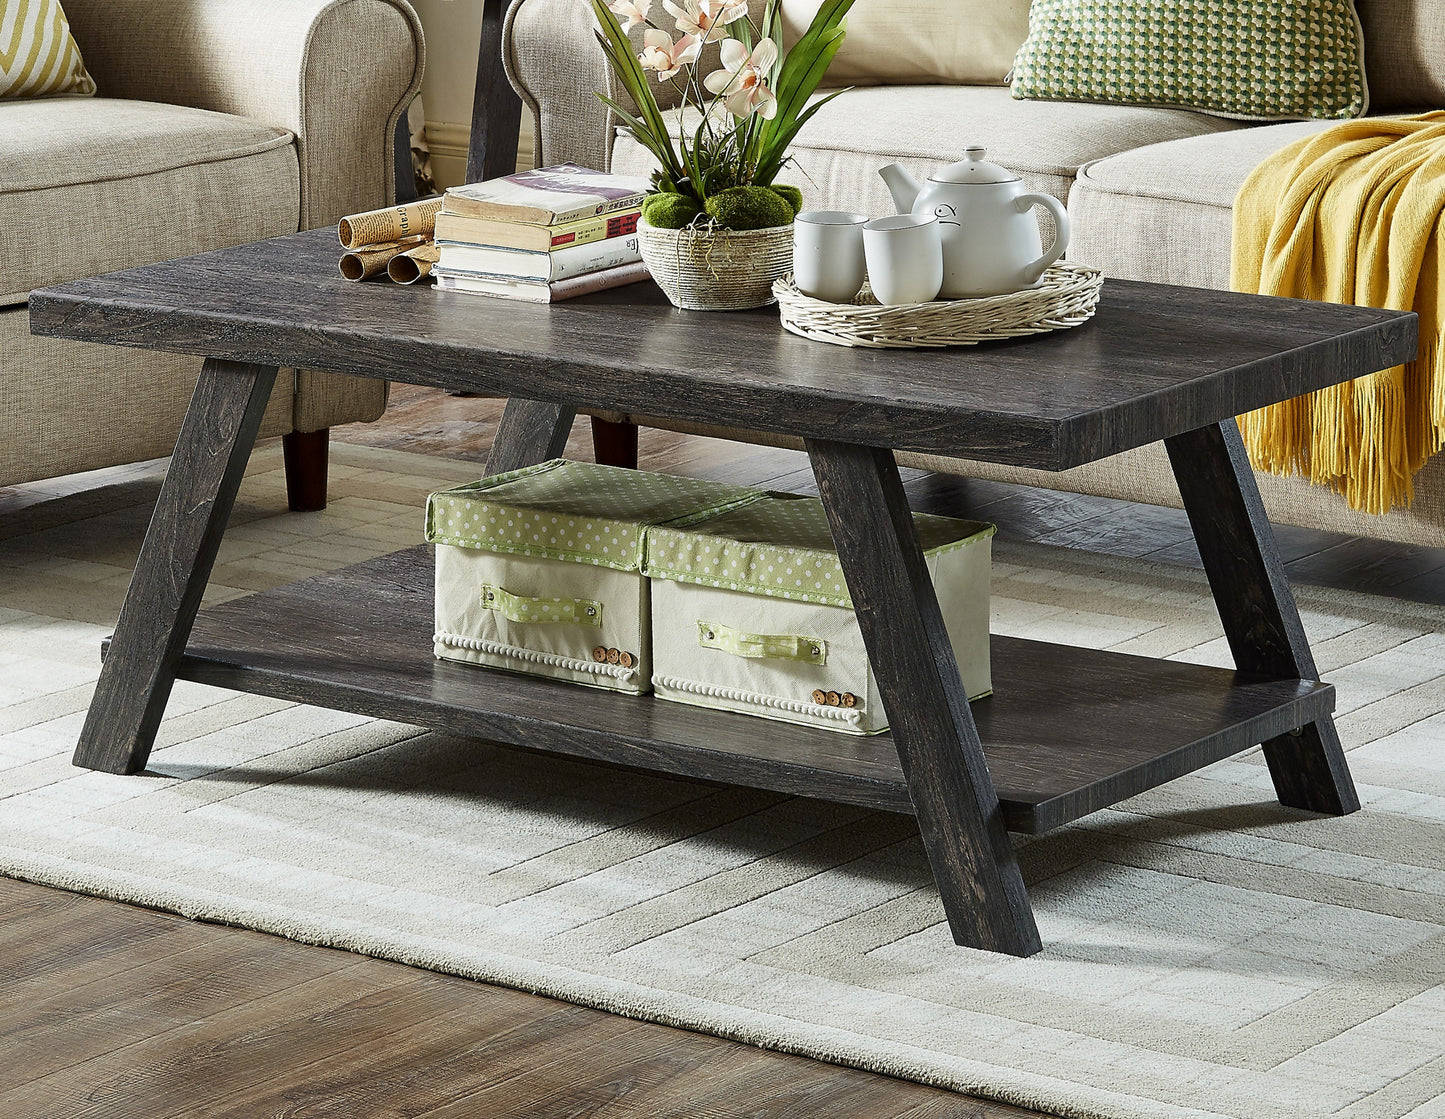 Athens Contemporary Replicated Wood Shelf Coffee Table in Charcoal Finish